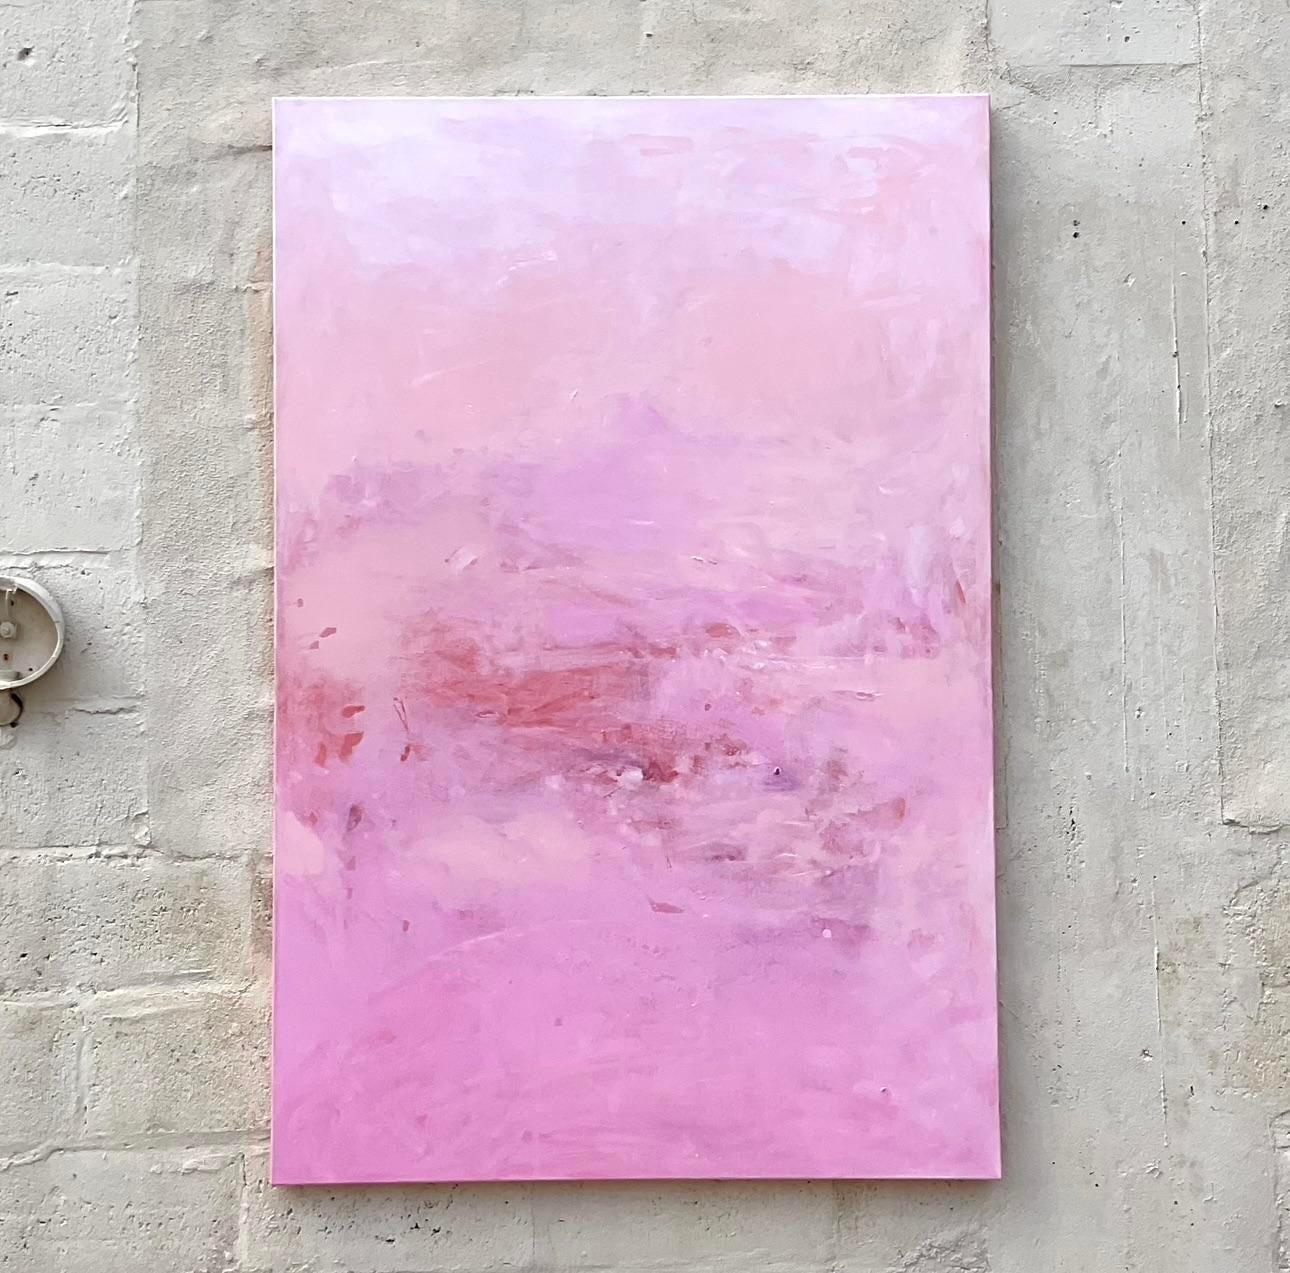 A fantastic vintage Boho signed original oil painting. A beautiful Abstract composition in brilliant shades of pink. Signed on the back and titled 